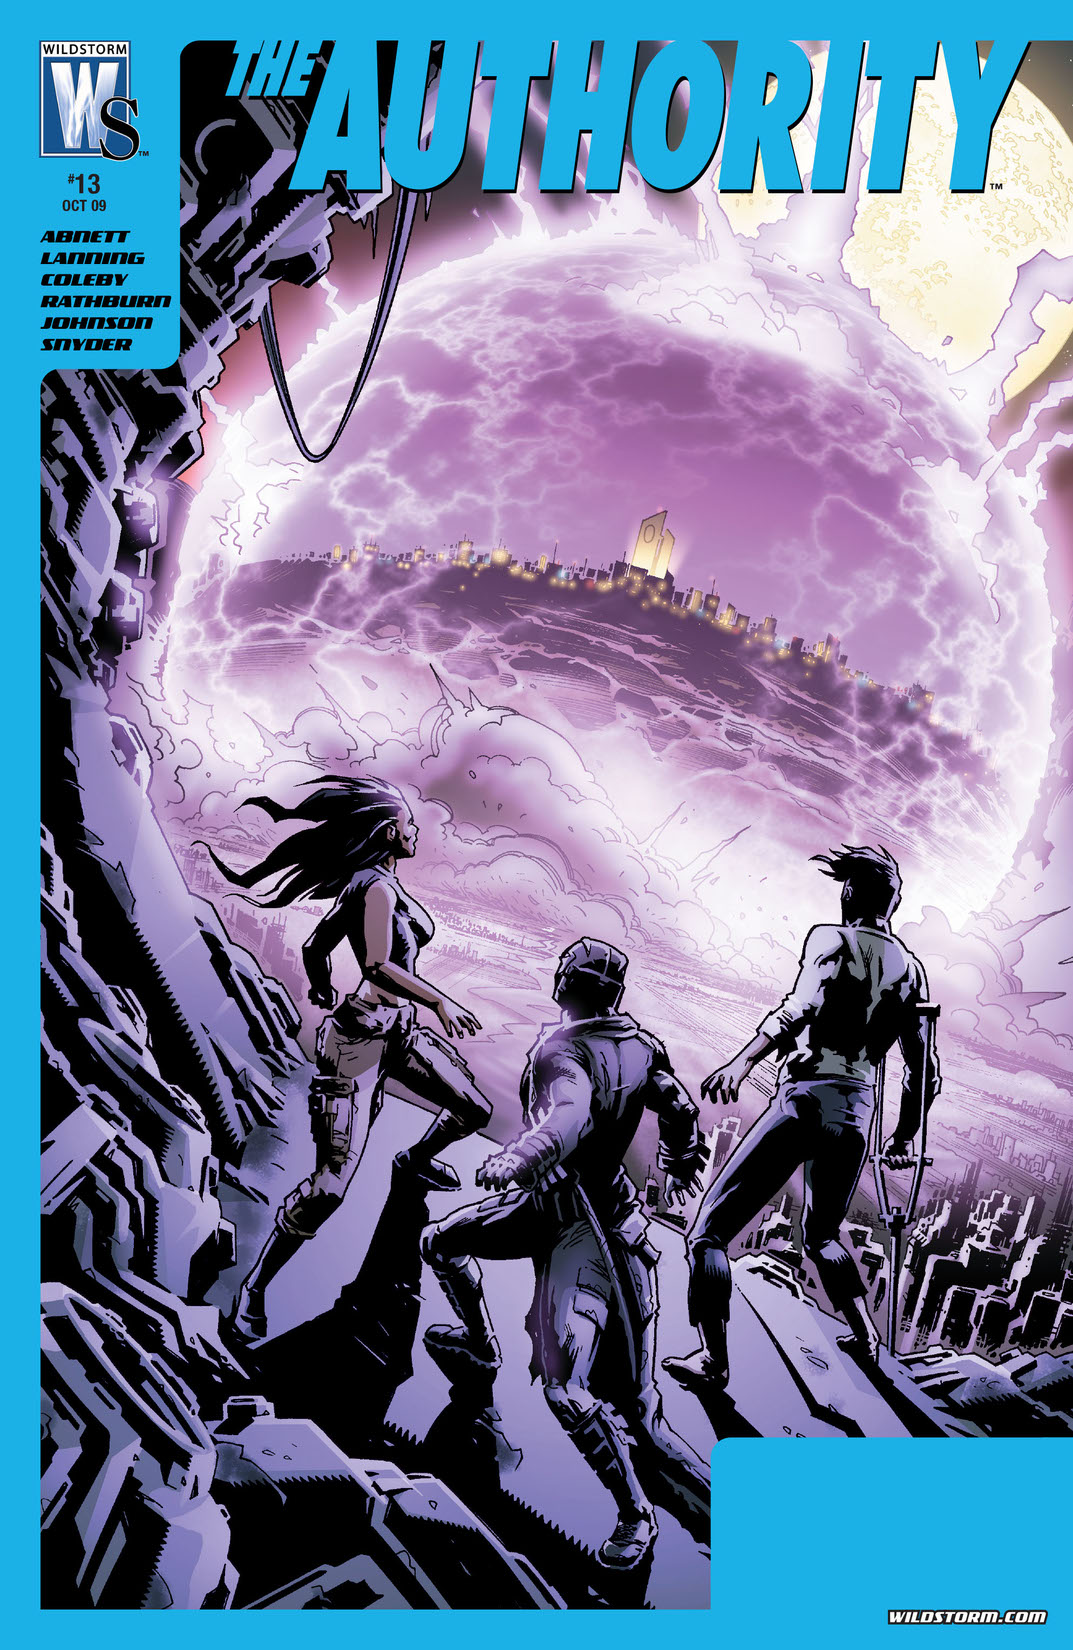 Authority (2008-) #13 preview images